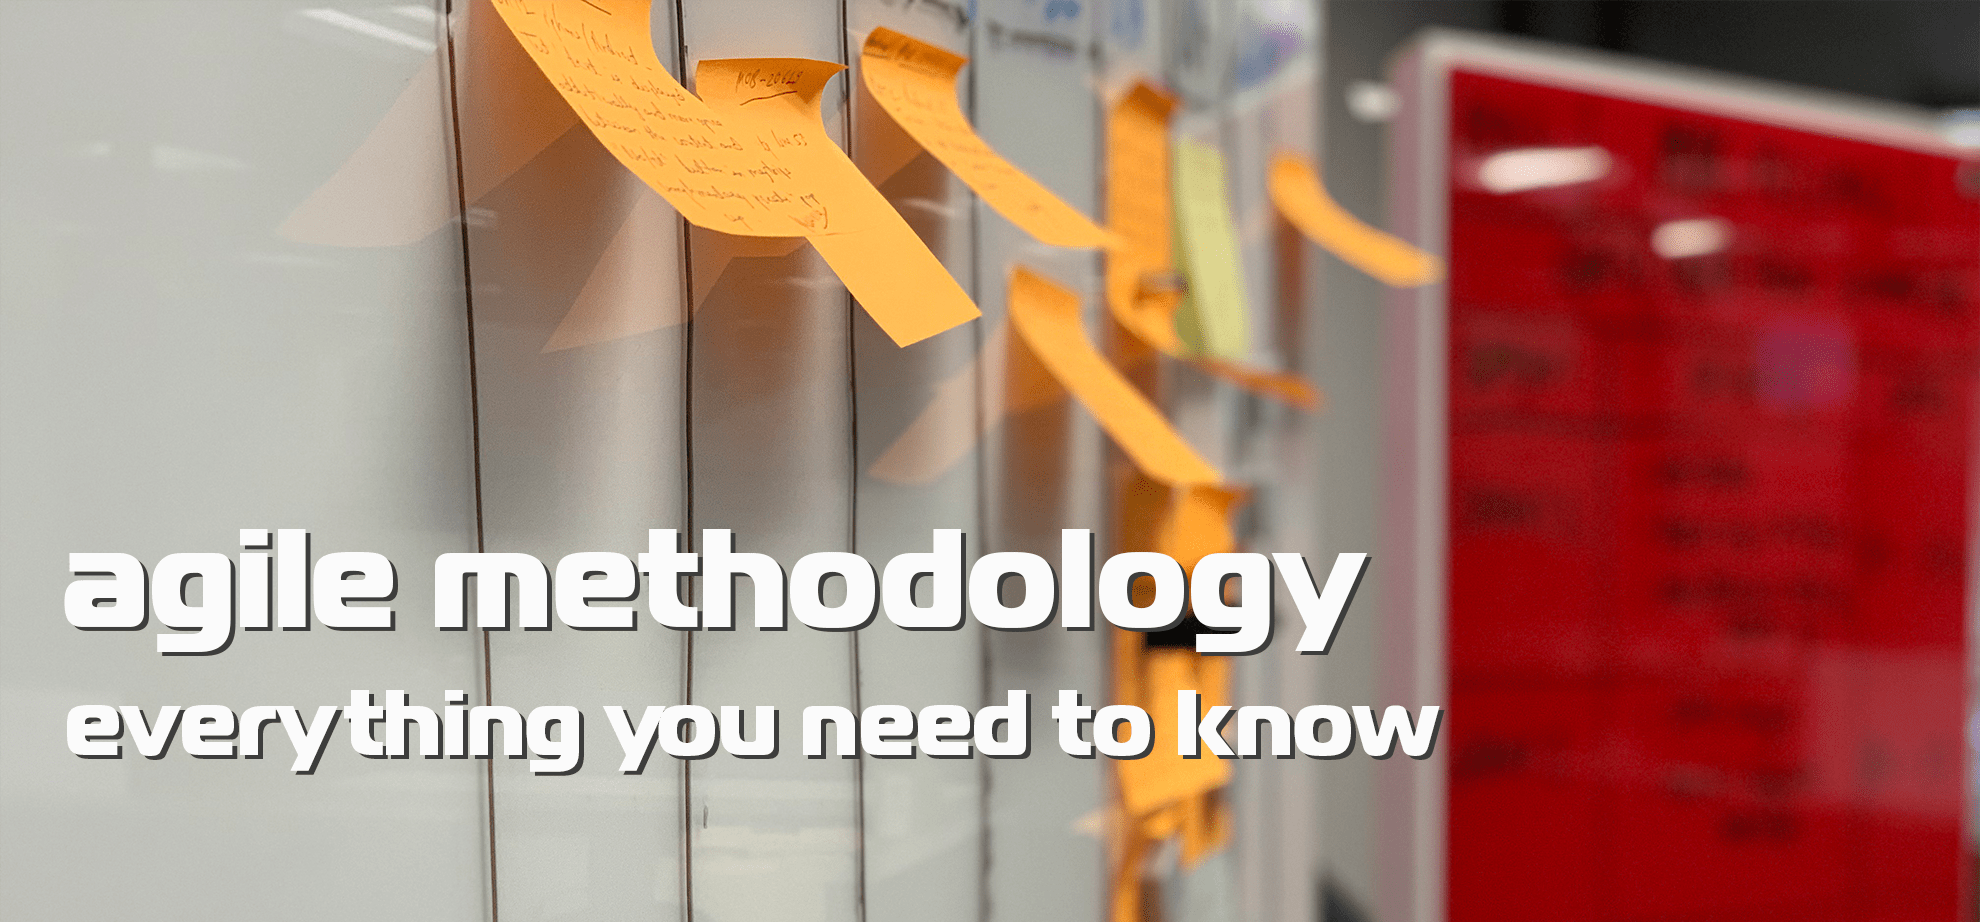 Agile Methodology: Everything you need to know